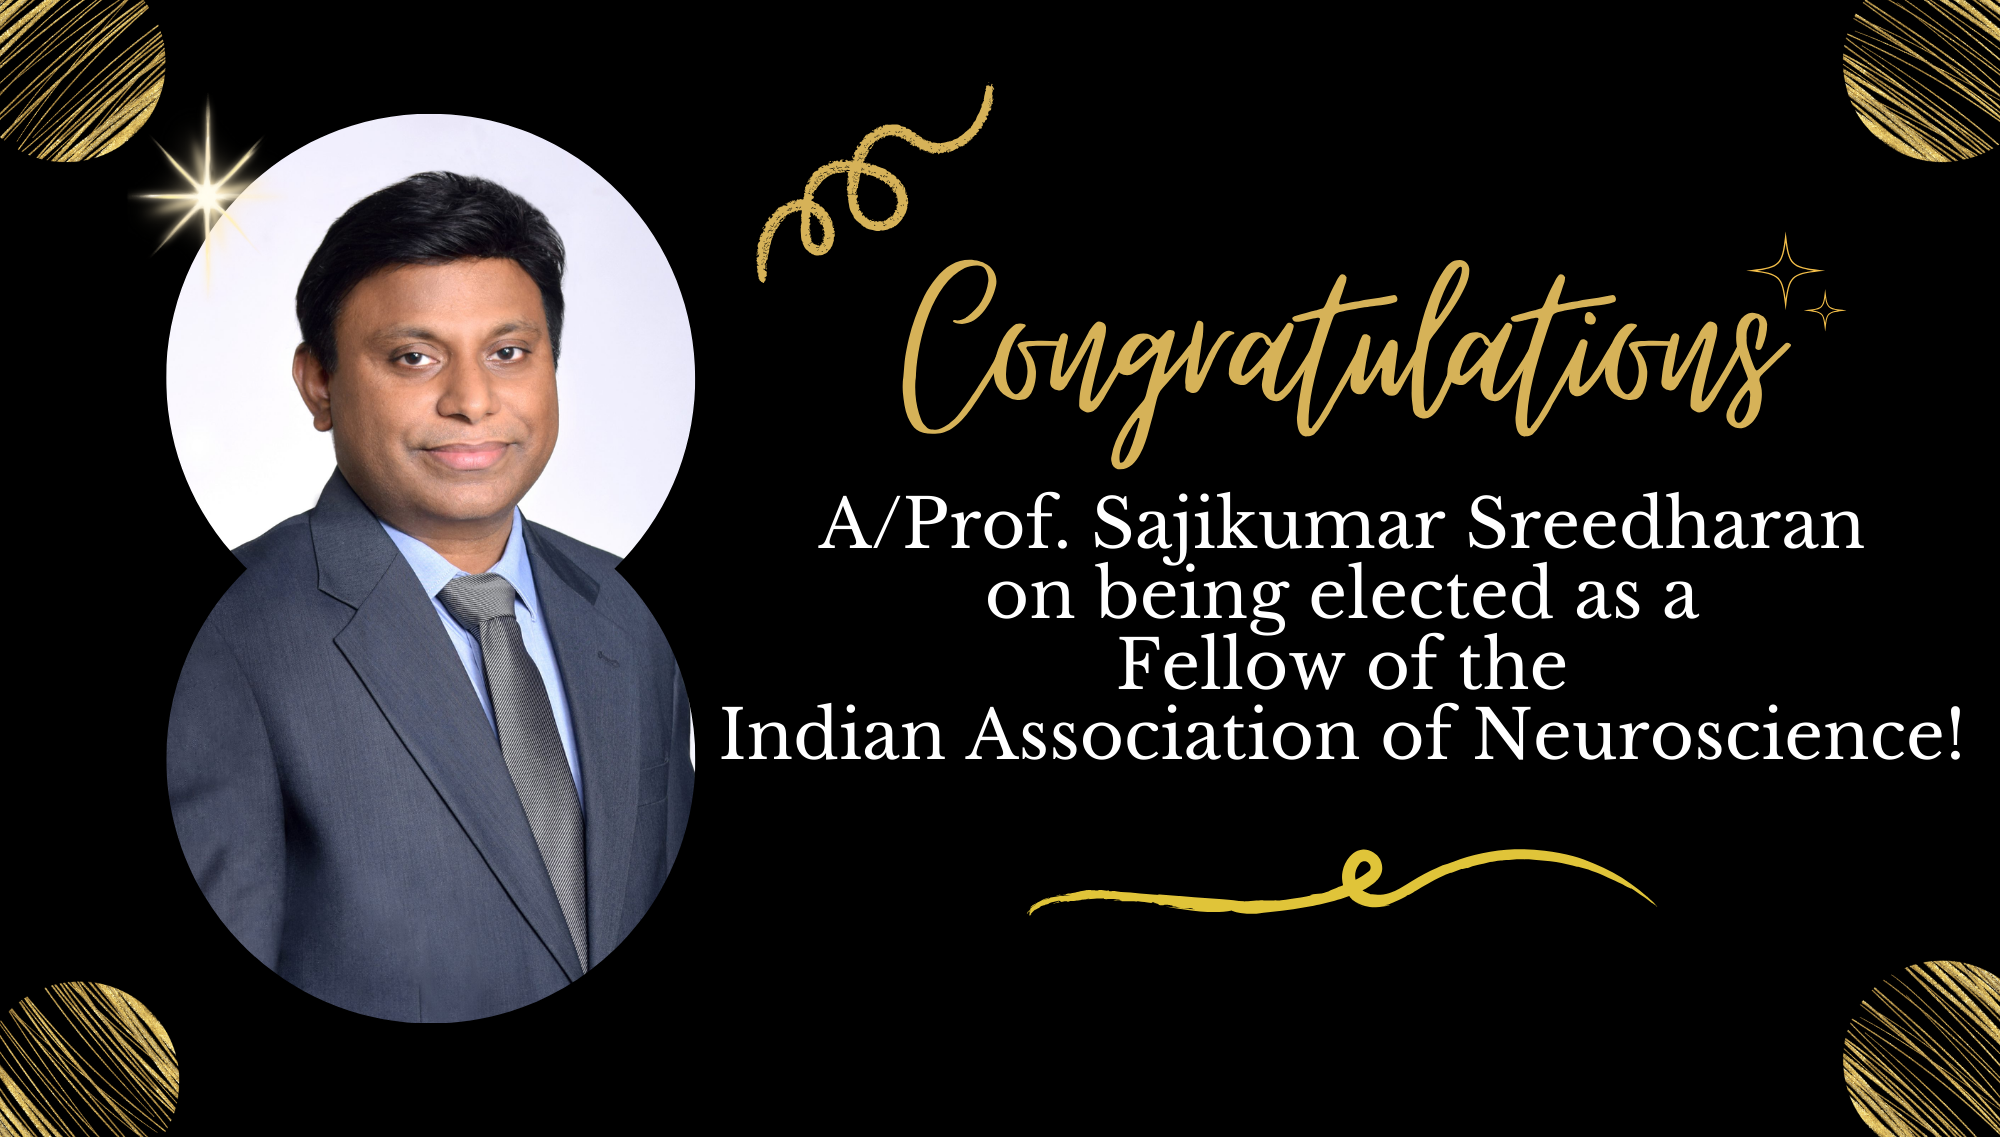 Congratulations A/Prof. Sajikumar Sreedharan on being elected as a Fellow of the Indian Association of Neuroscience!